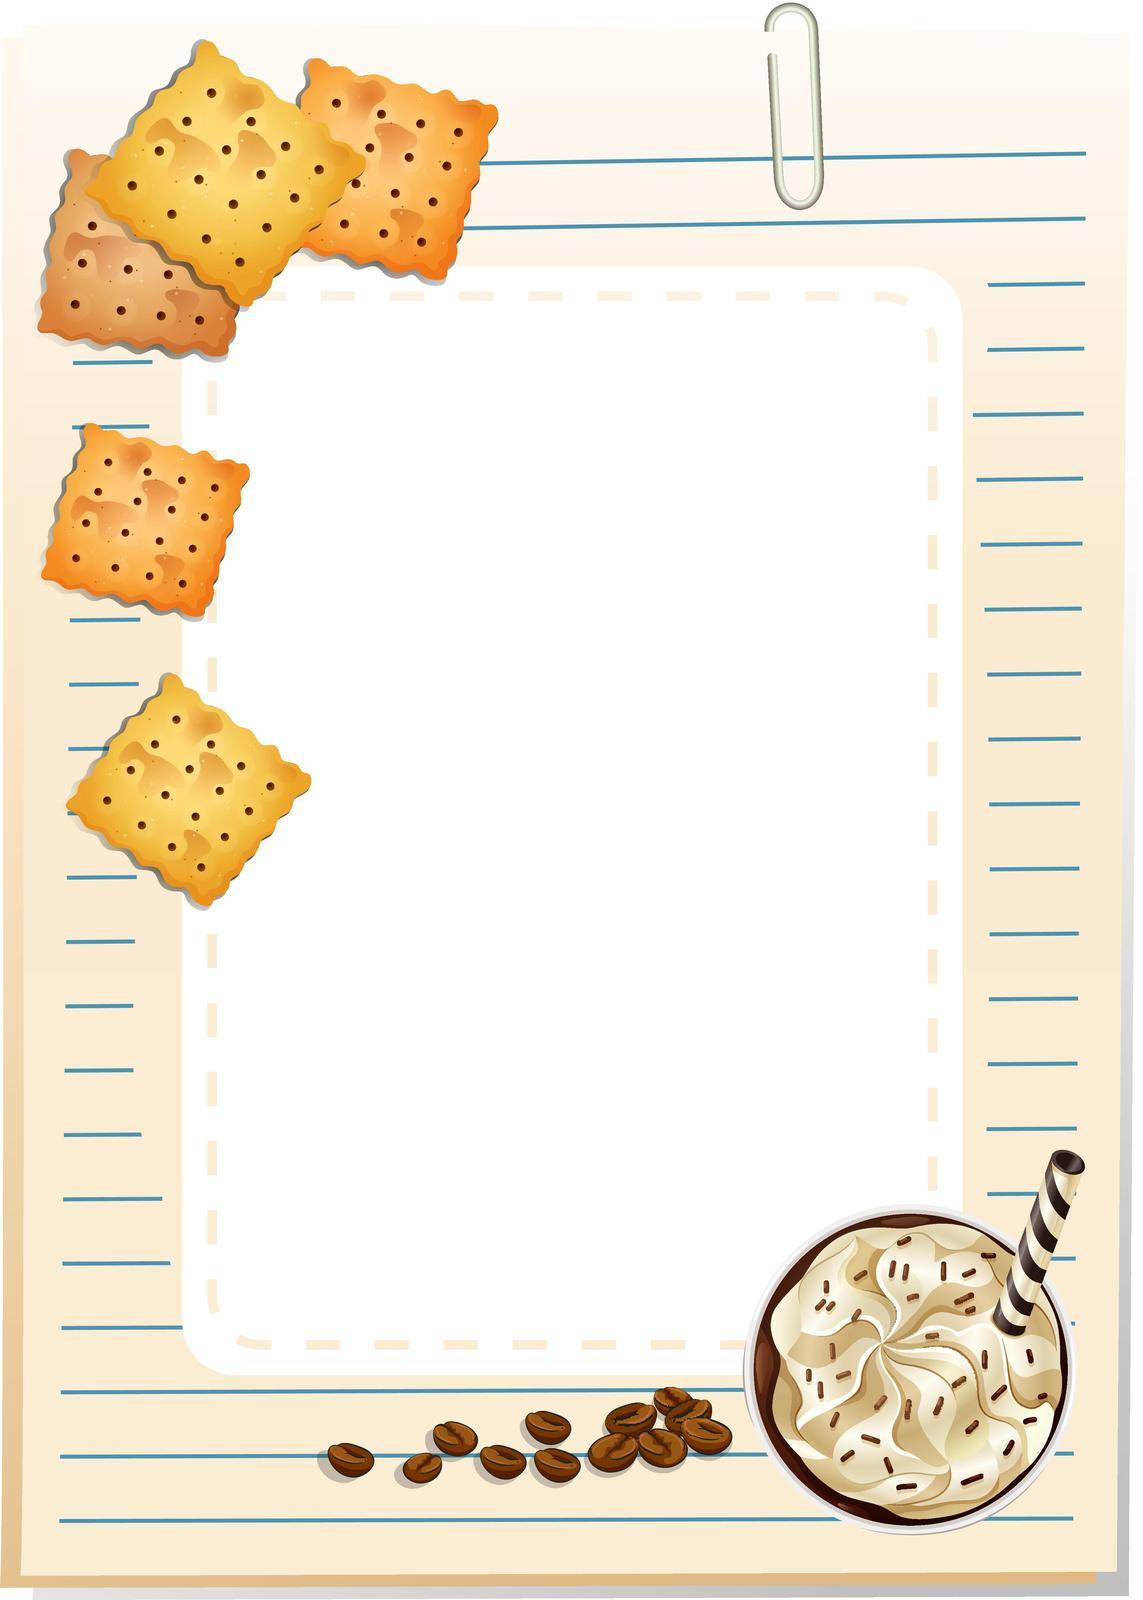 Notepad with biscuits and ice cream design